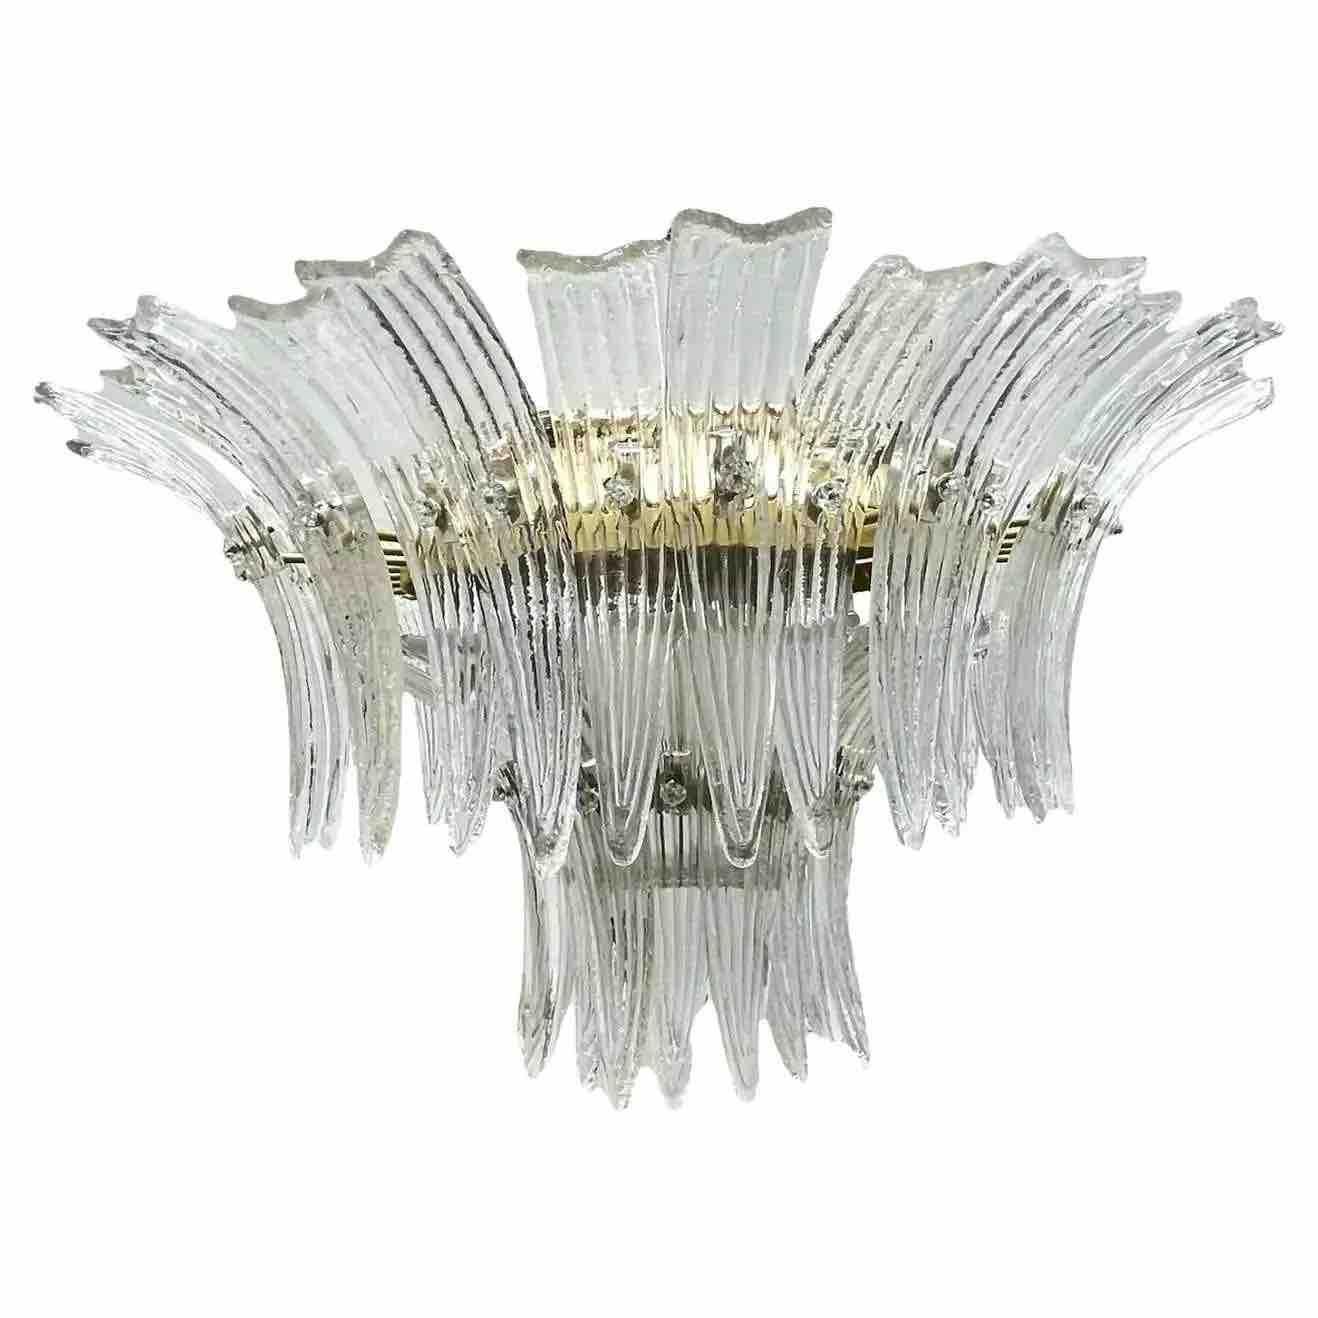 A pair of very elegant, vintage estate, midcentury Venetian Murano art glass chandelier features 2 round tiers of overlapping, large, curved, hand-blown clear palm leaves frosted in the 